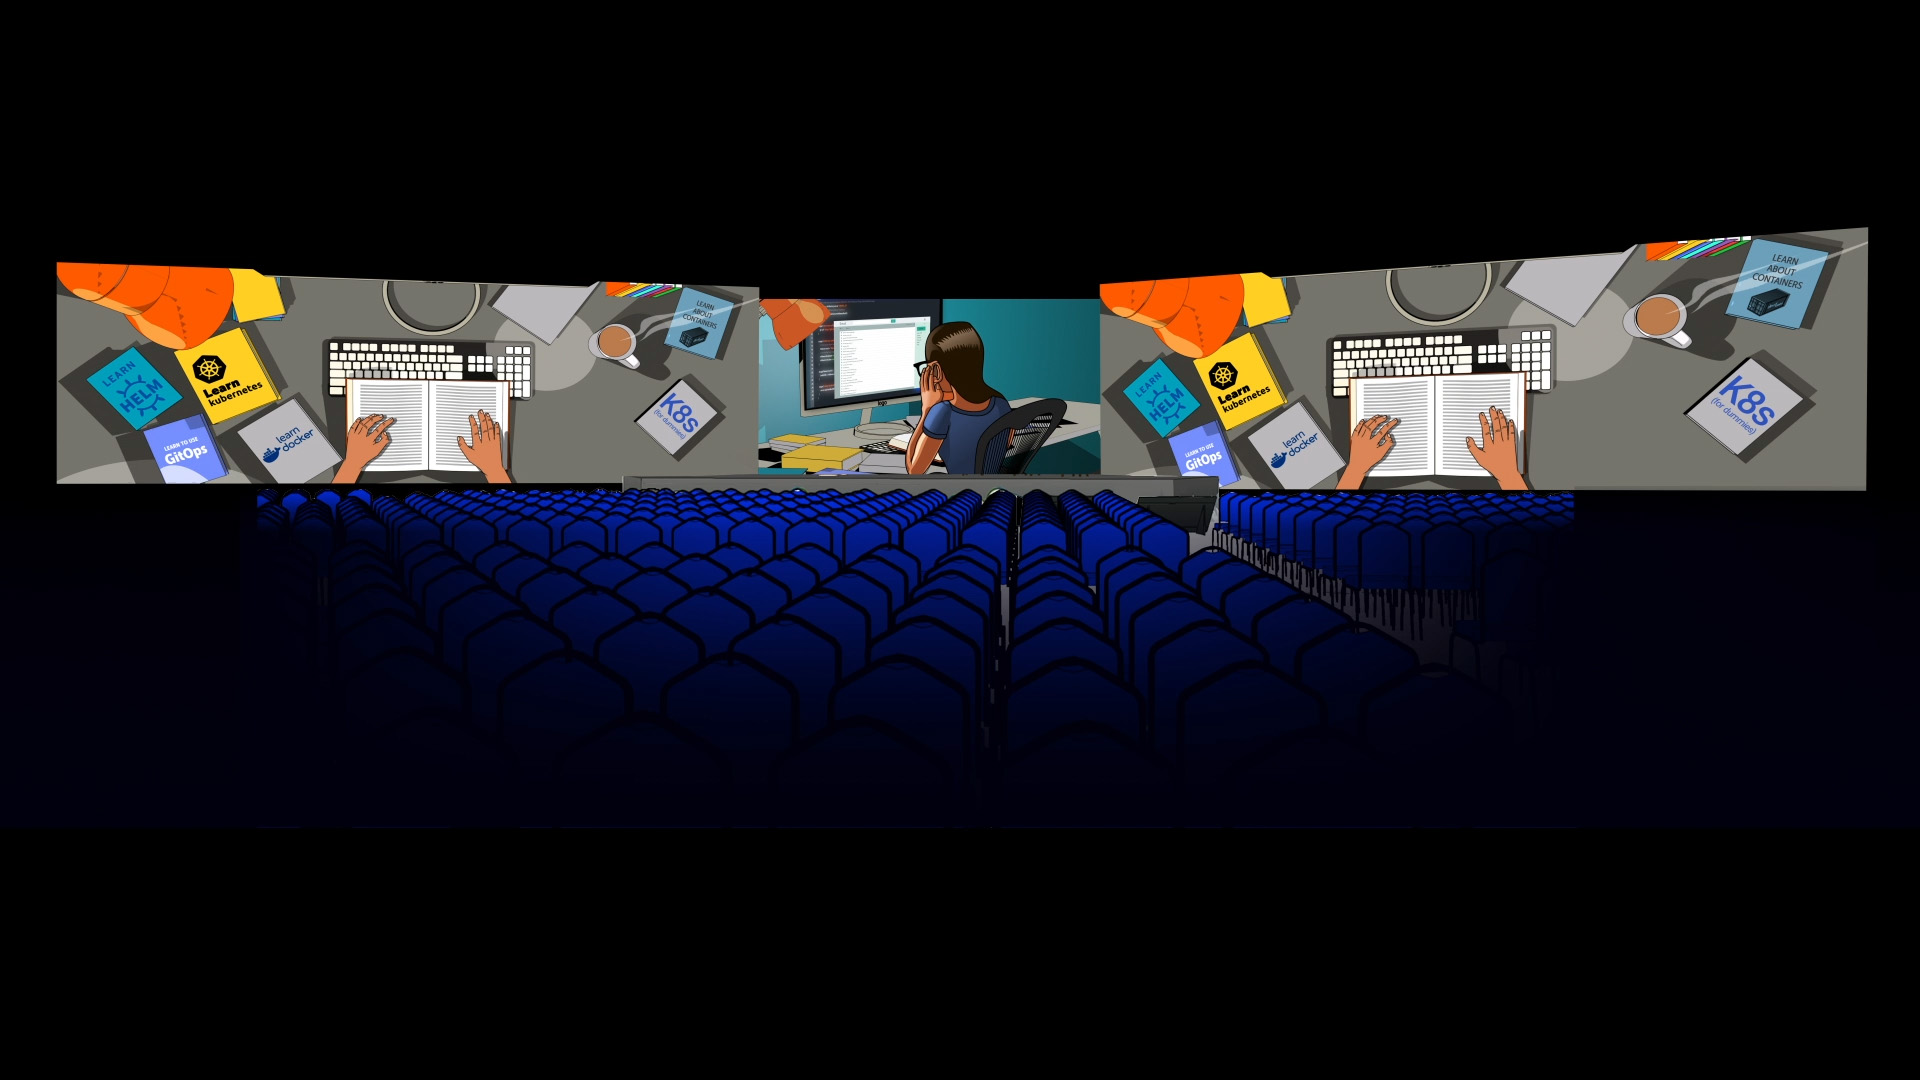 A stage mockup of the three screen set up from 2019 DevOps World Jenkins World event. It shows the illustrated opening video.